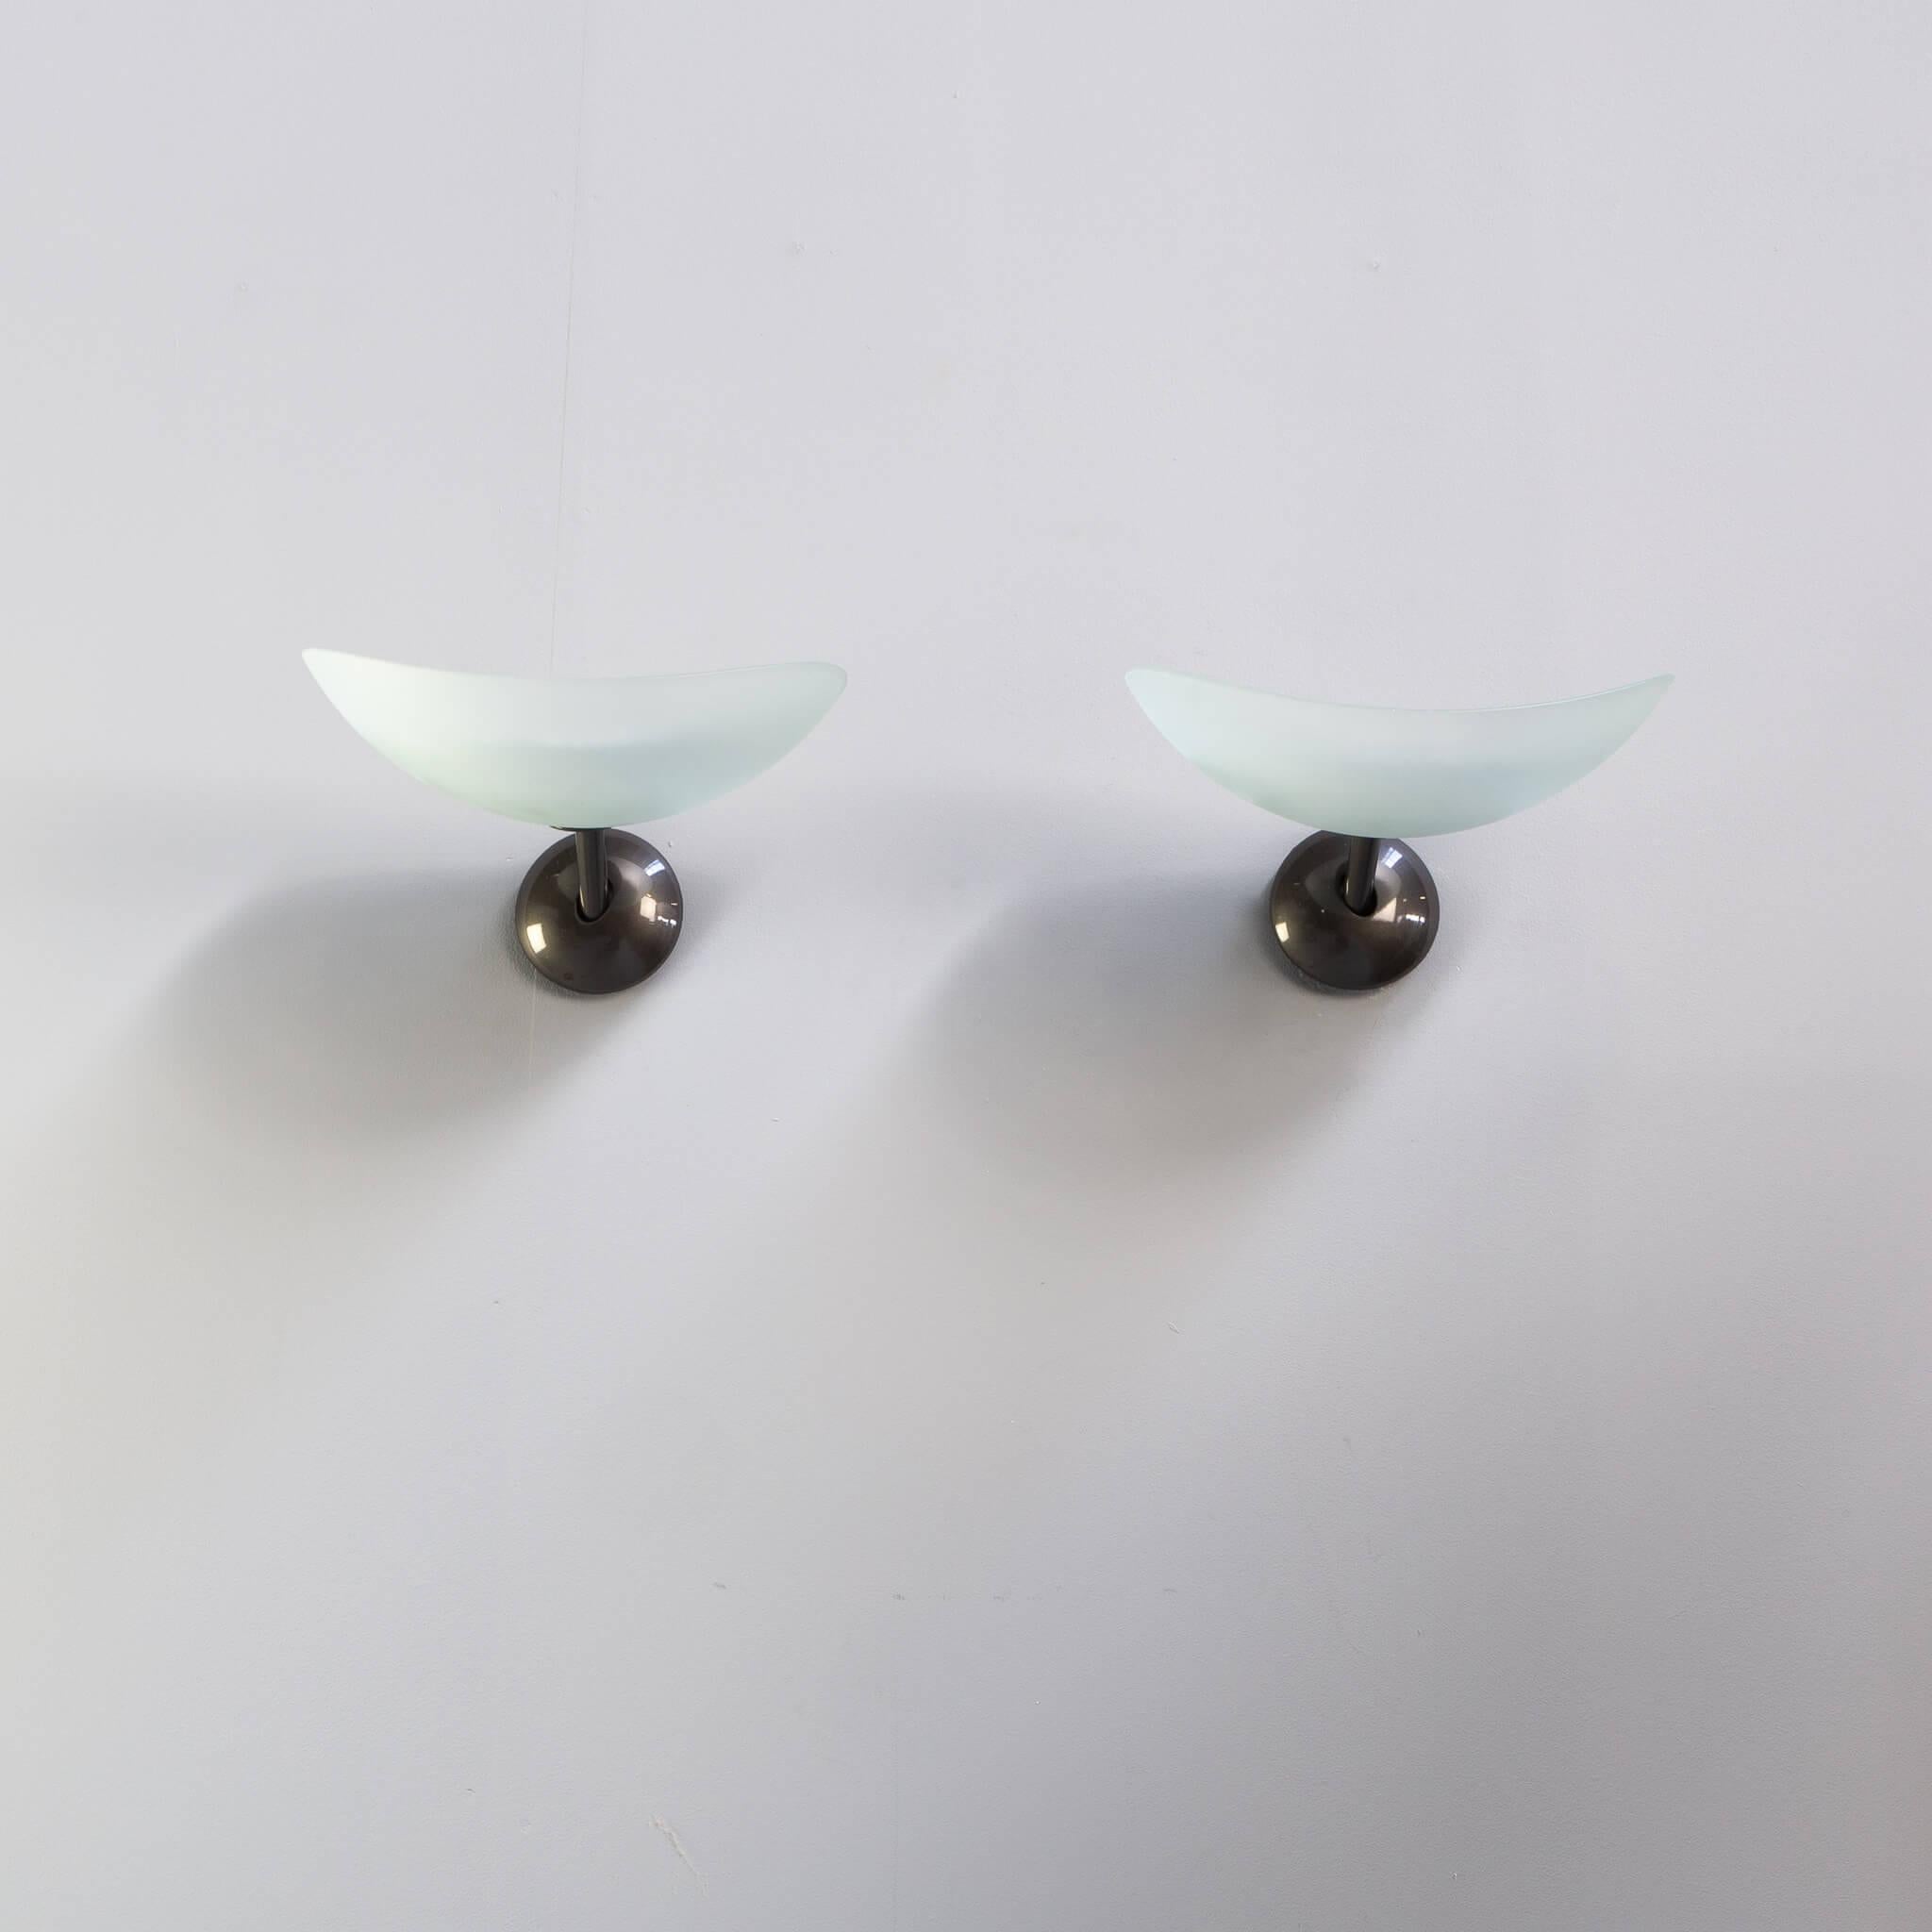 This set of 2 wall sconces from the model Tobe 35 Parete are made of glass scales with halogen bar bulbs in it. Note: it is possible to change the halogen into led bar bulbs these days. The wall lamp is very rare to find. We have 3 sets of 2 pieces